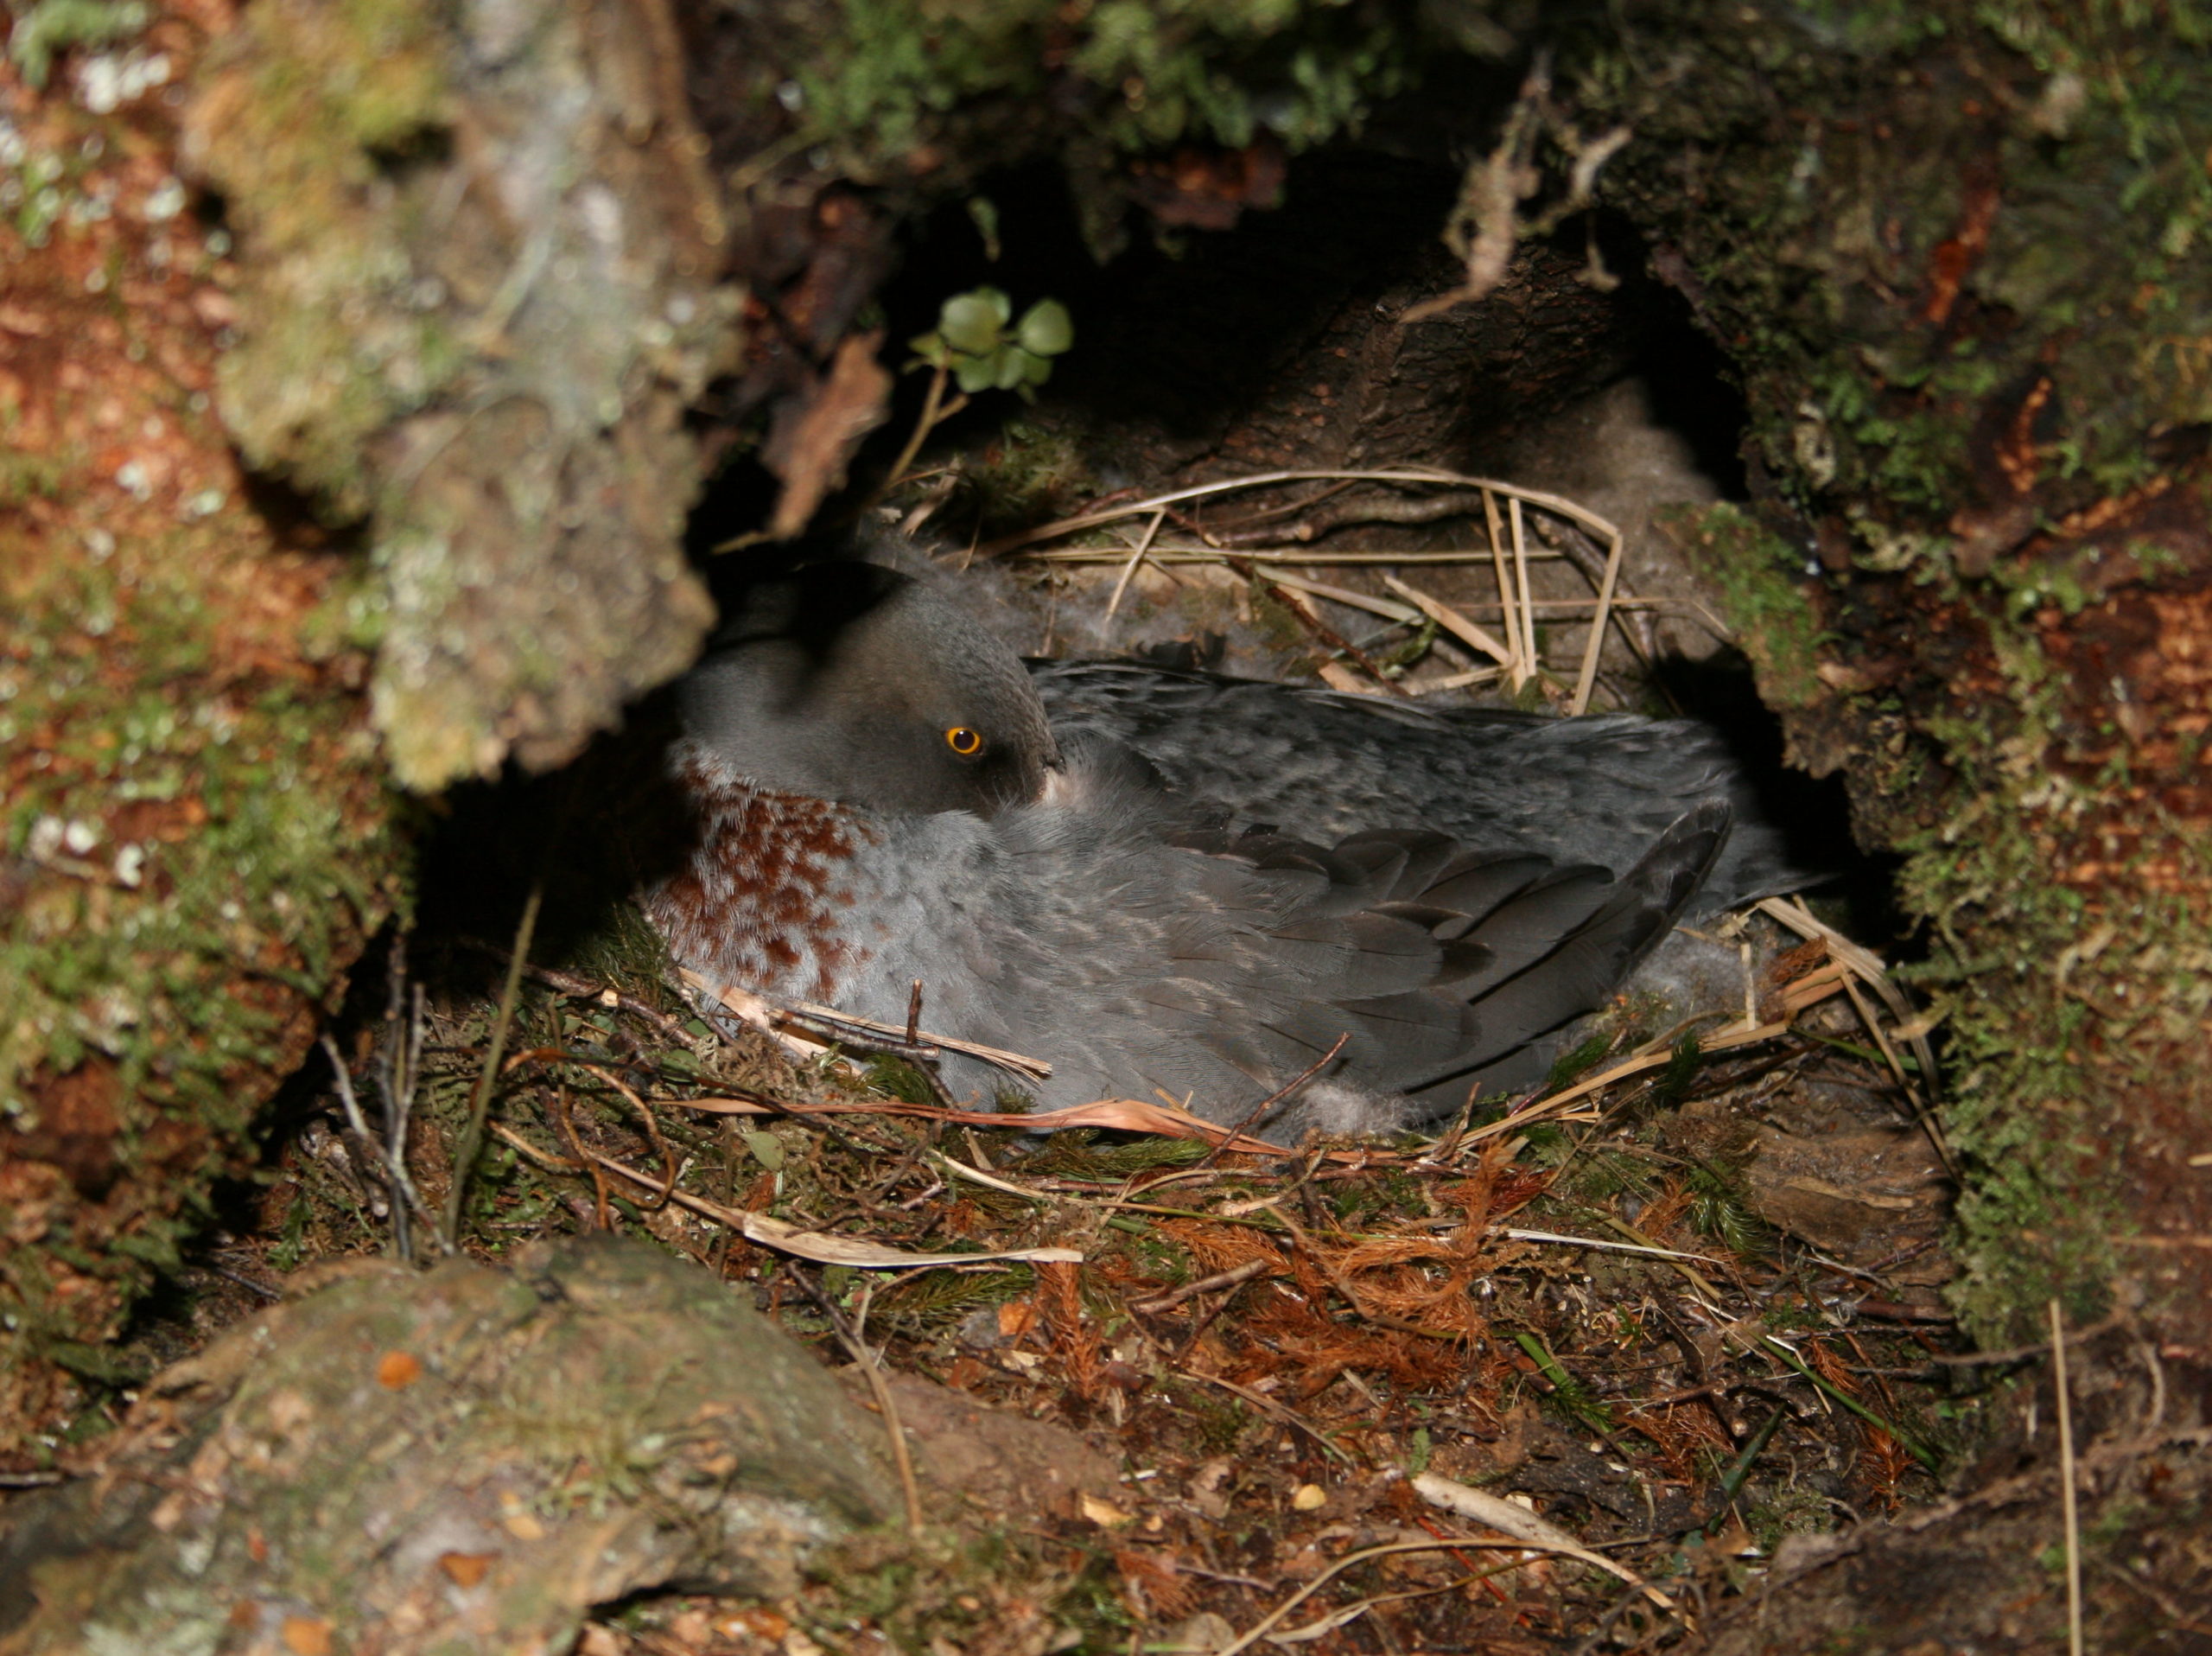 A whio nesting in a burrow.